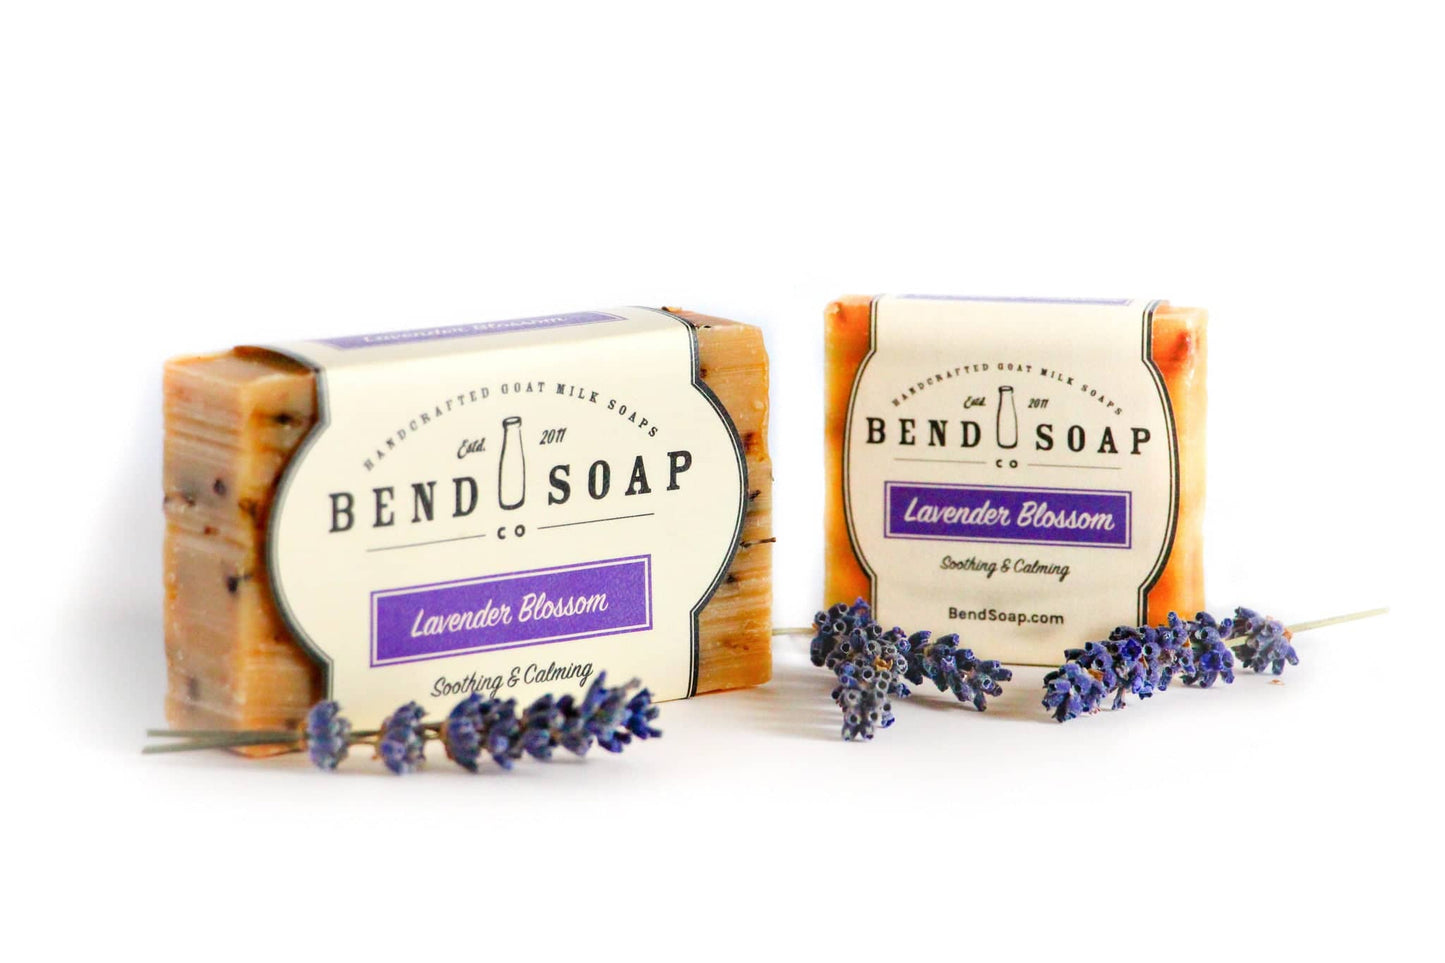 Full Size Lavender Blossom bar of soap and Travel Size bar of soap wrapped in Lavender Blossom labels.